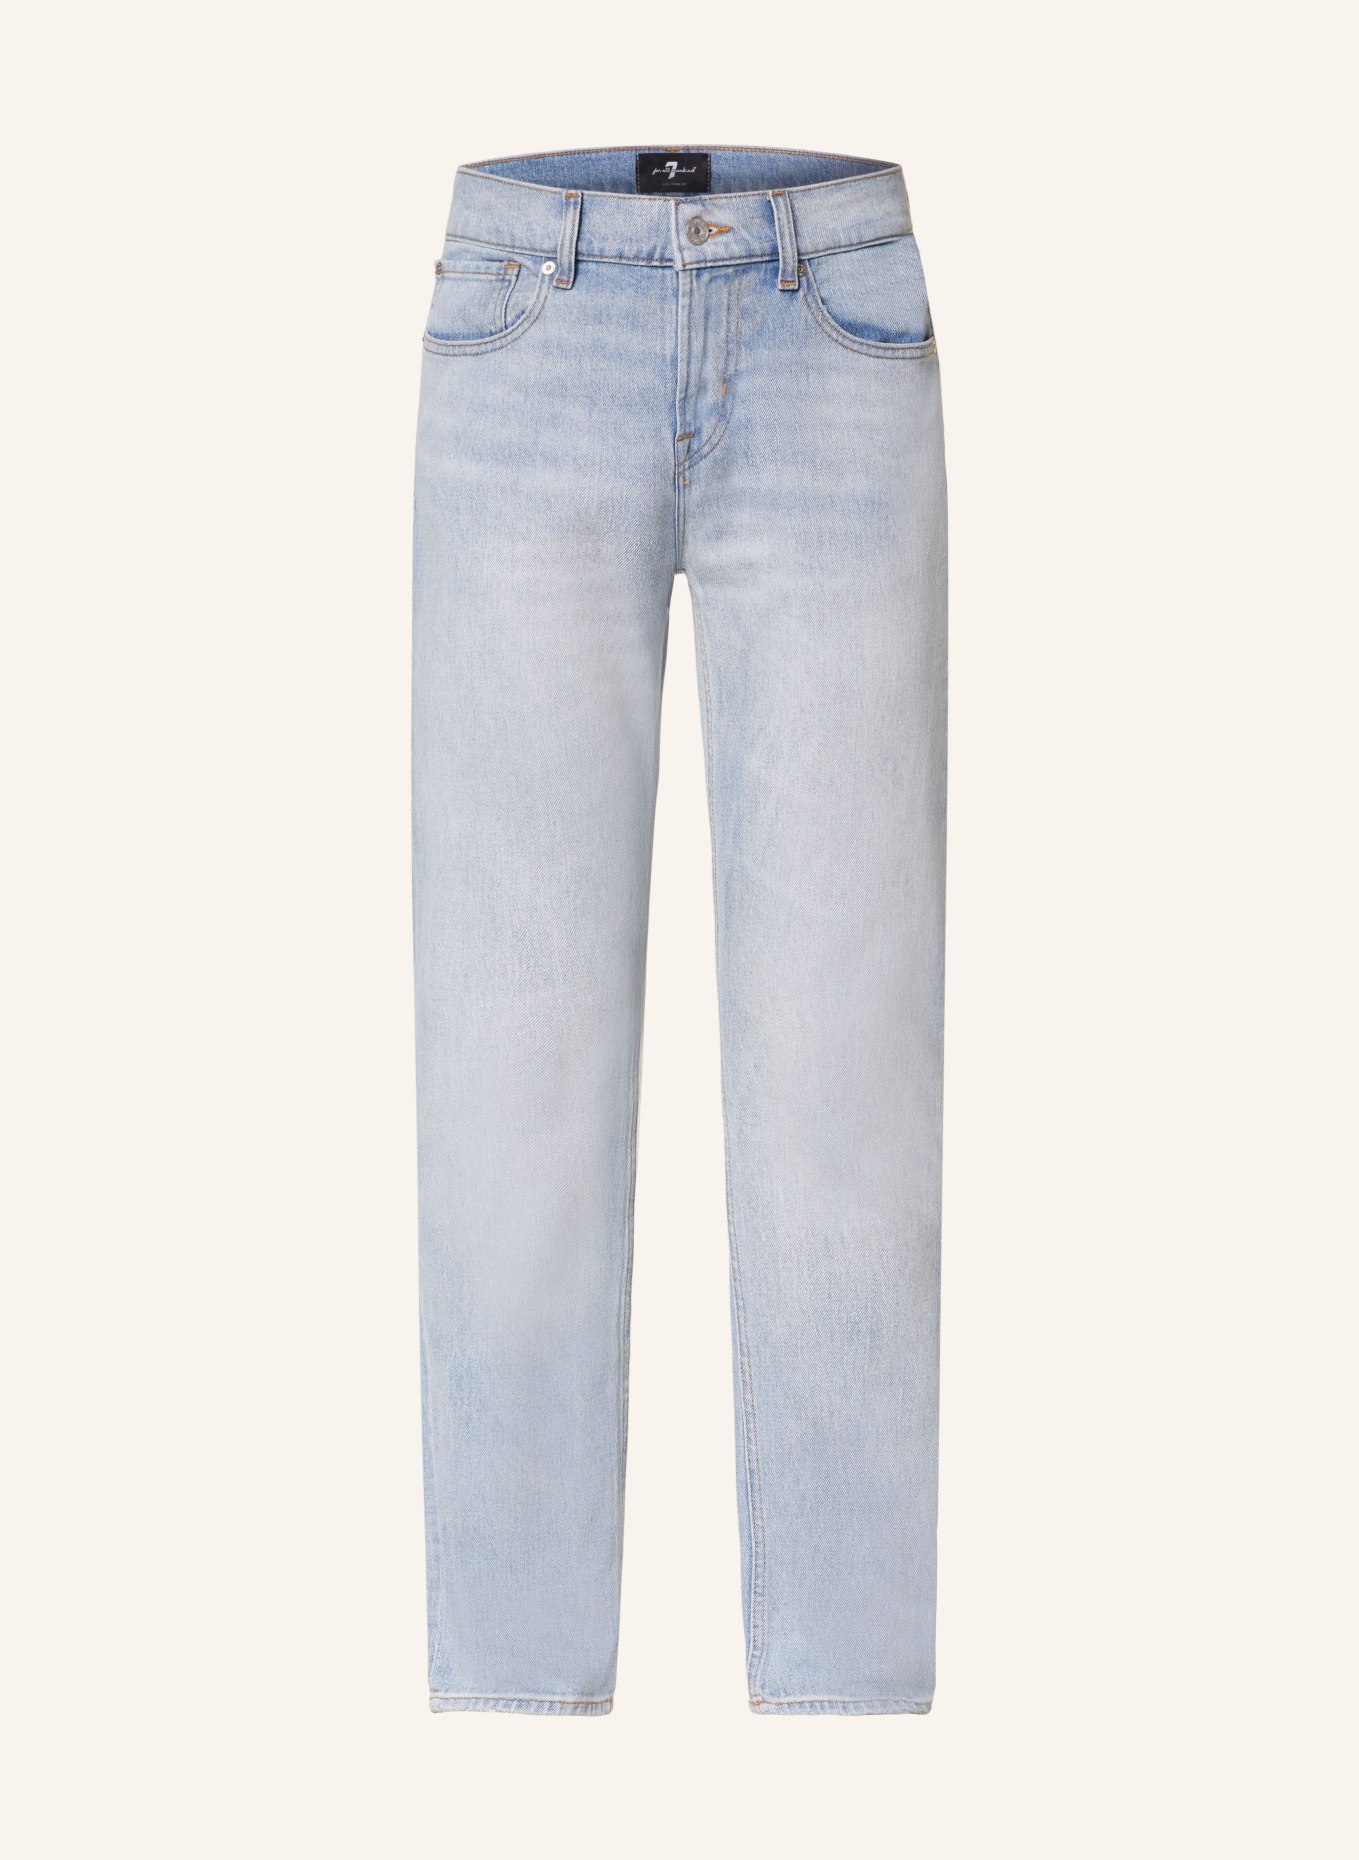 7 for all mankind Jeans SLIMMY Slim Straight Fit, Farbe: LIGHT BLUE (Bild 1)